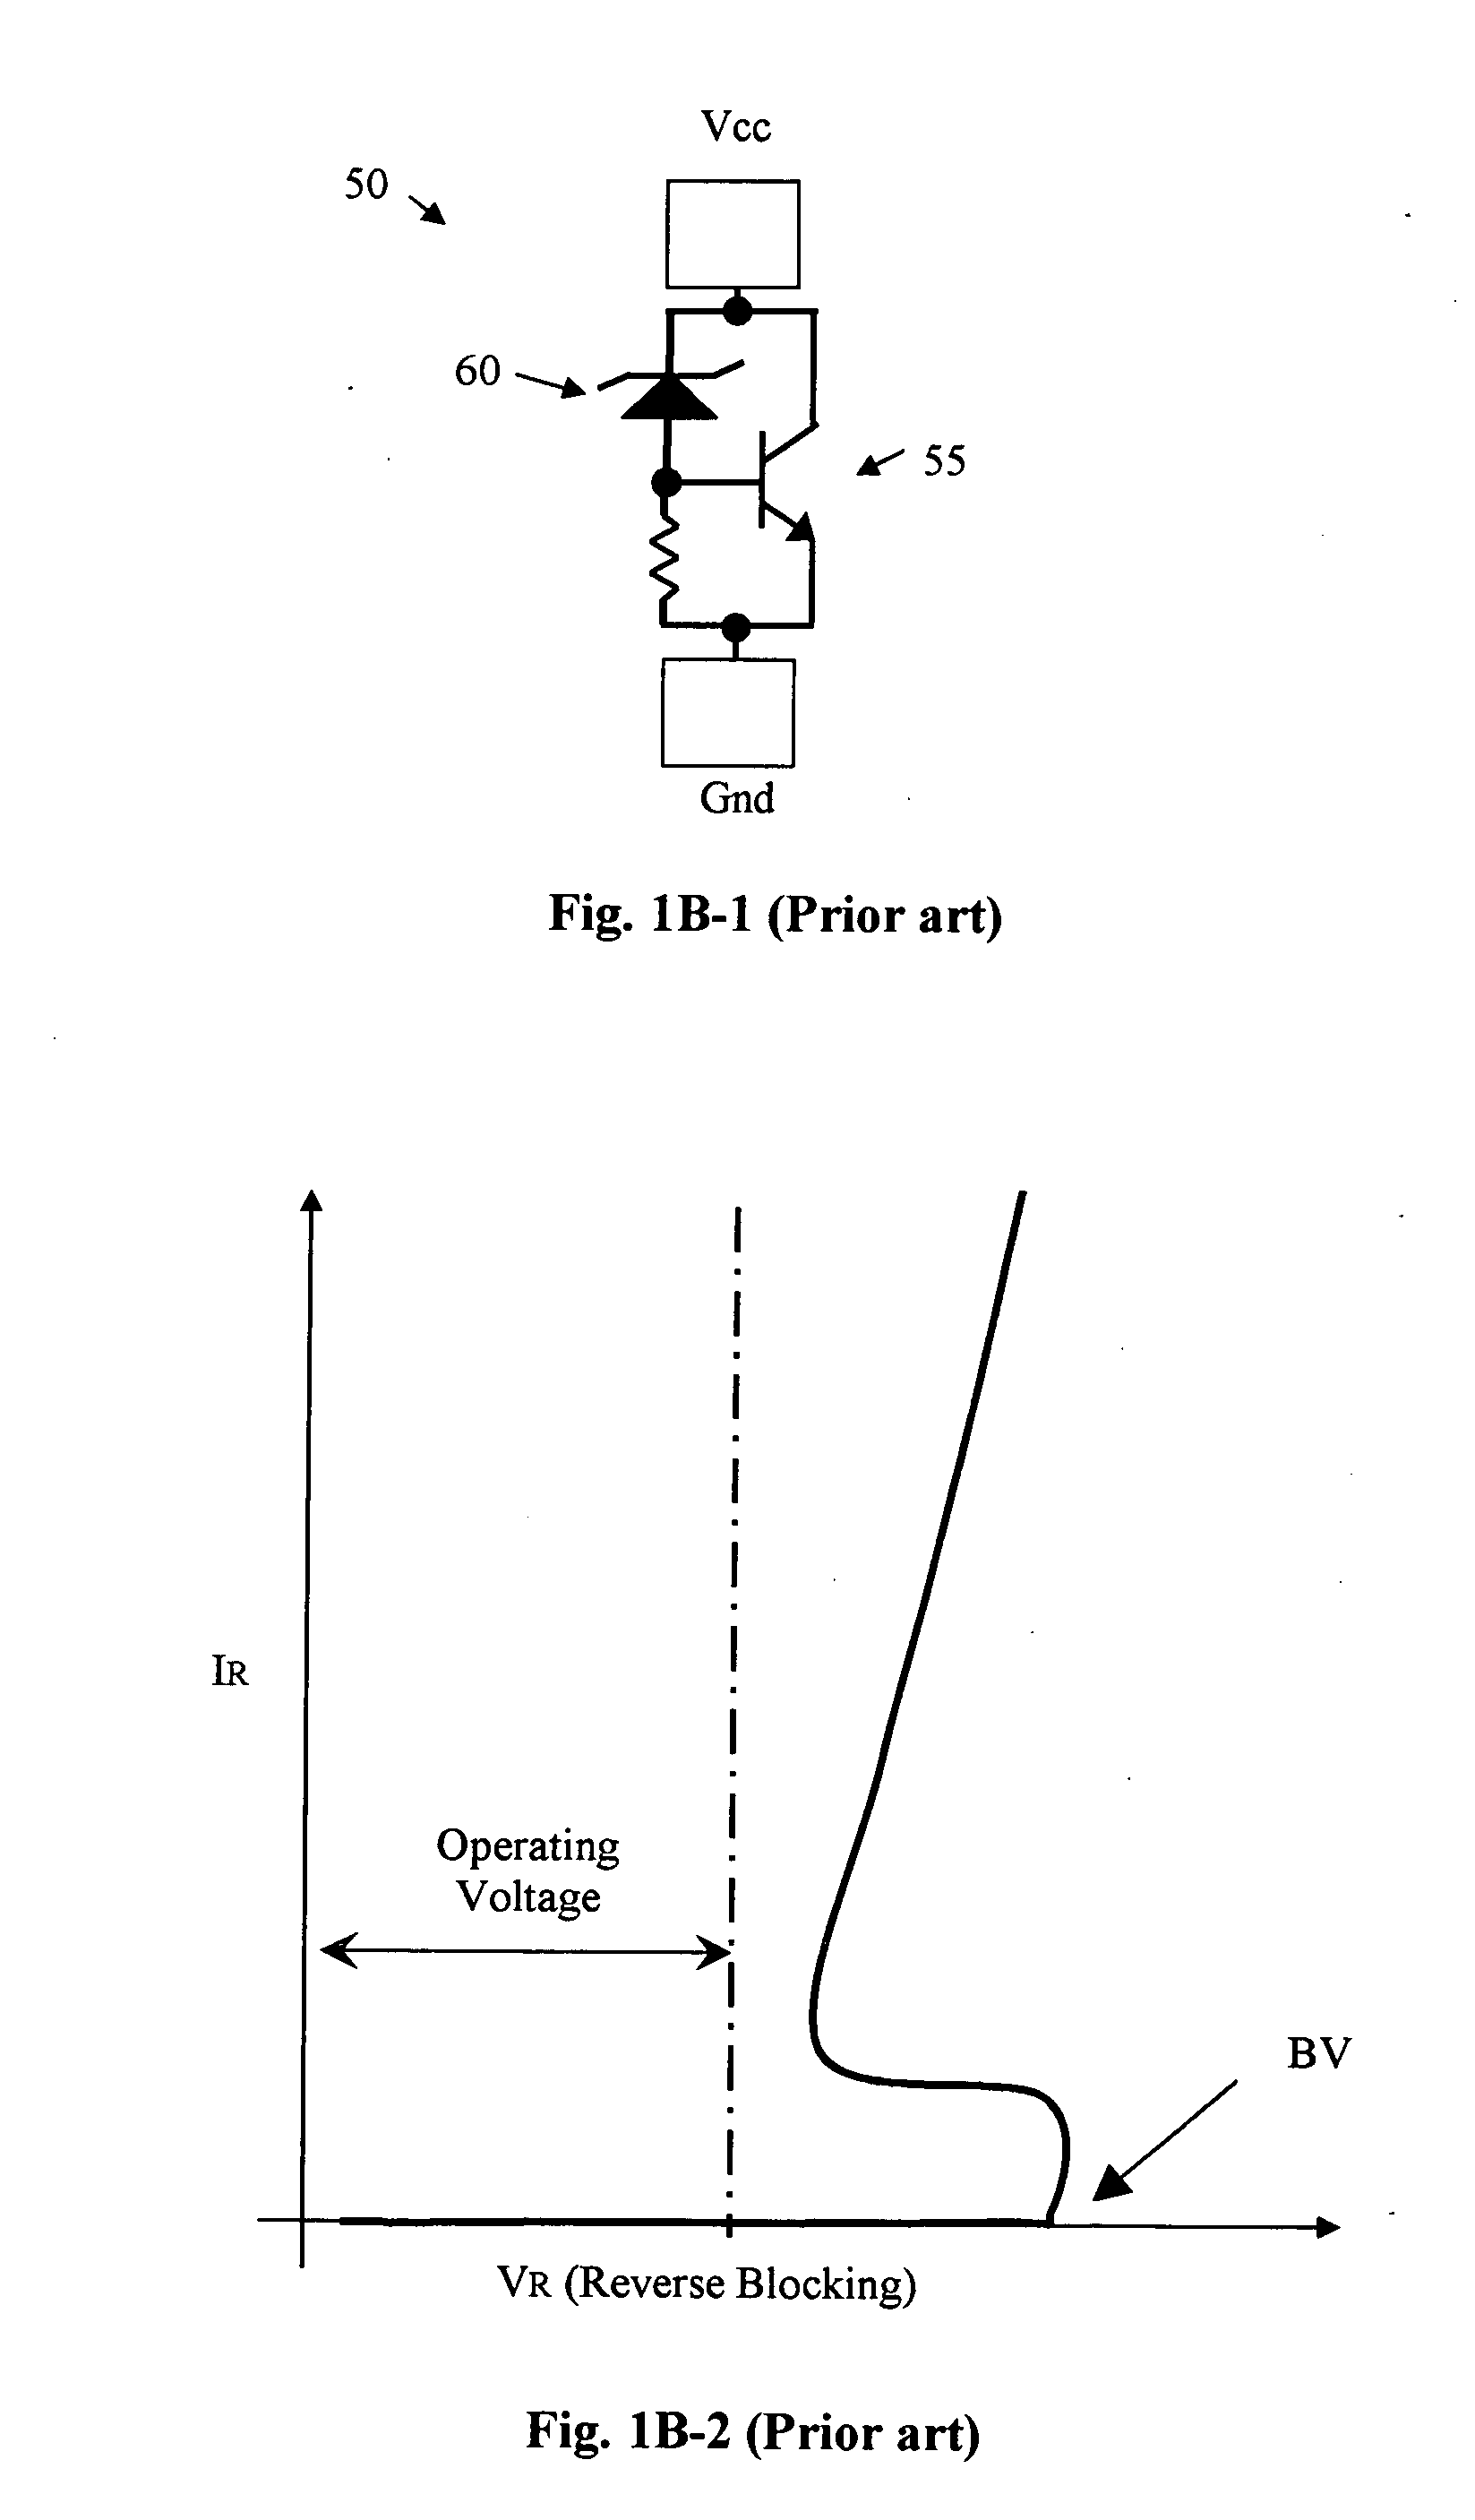 Transient voltage suppressor (TVS) with improved clamping voltage